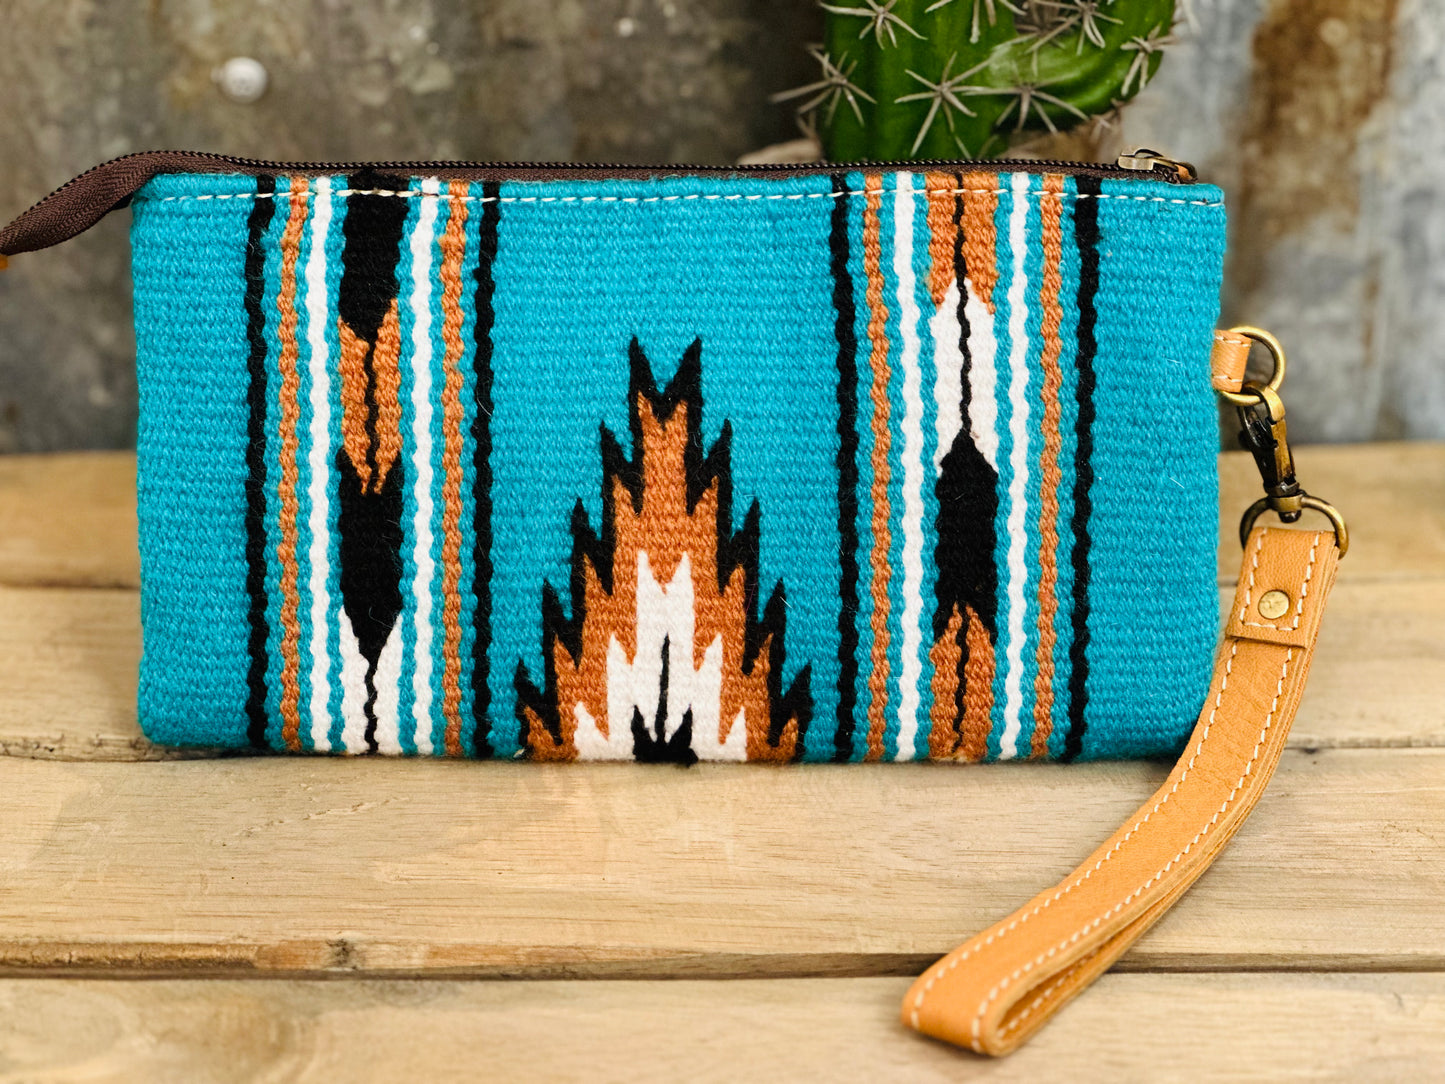 Turquoise Saddle Blanket Clutch with Brown Tooling Details